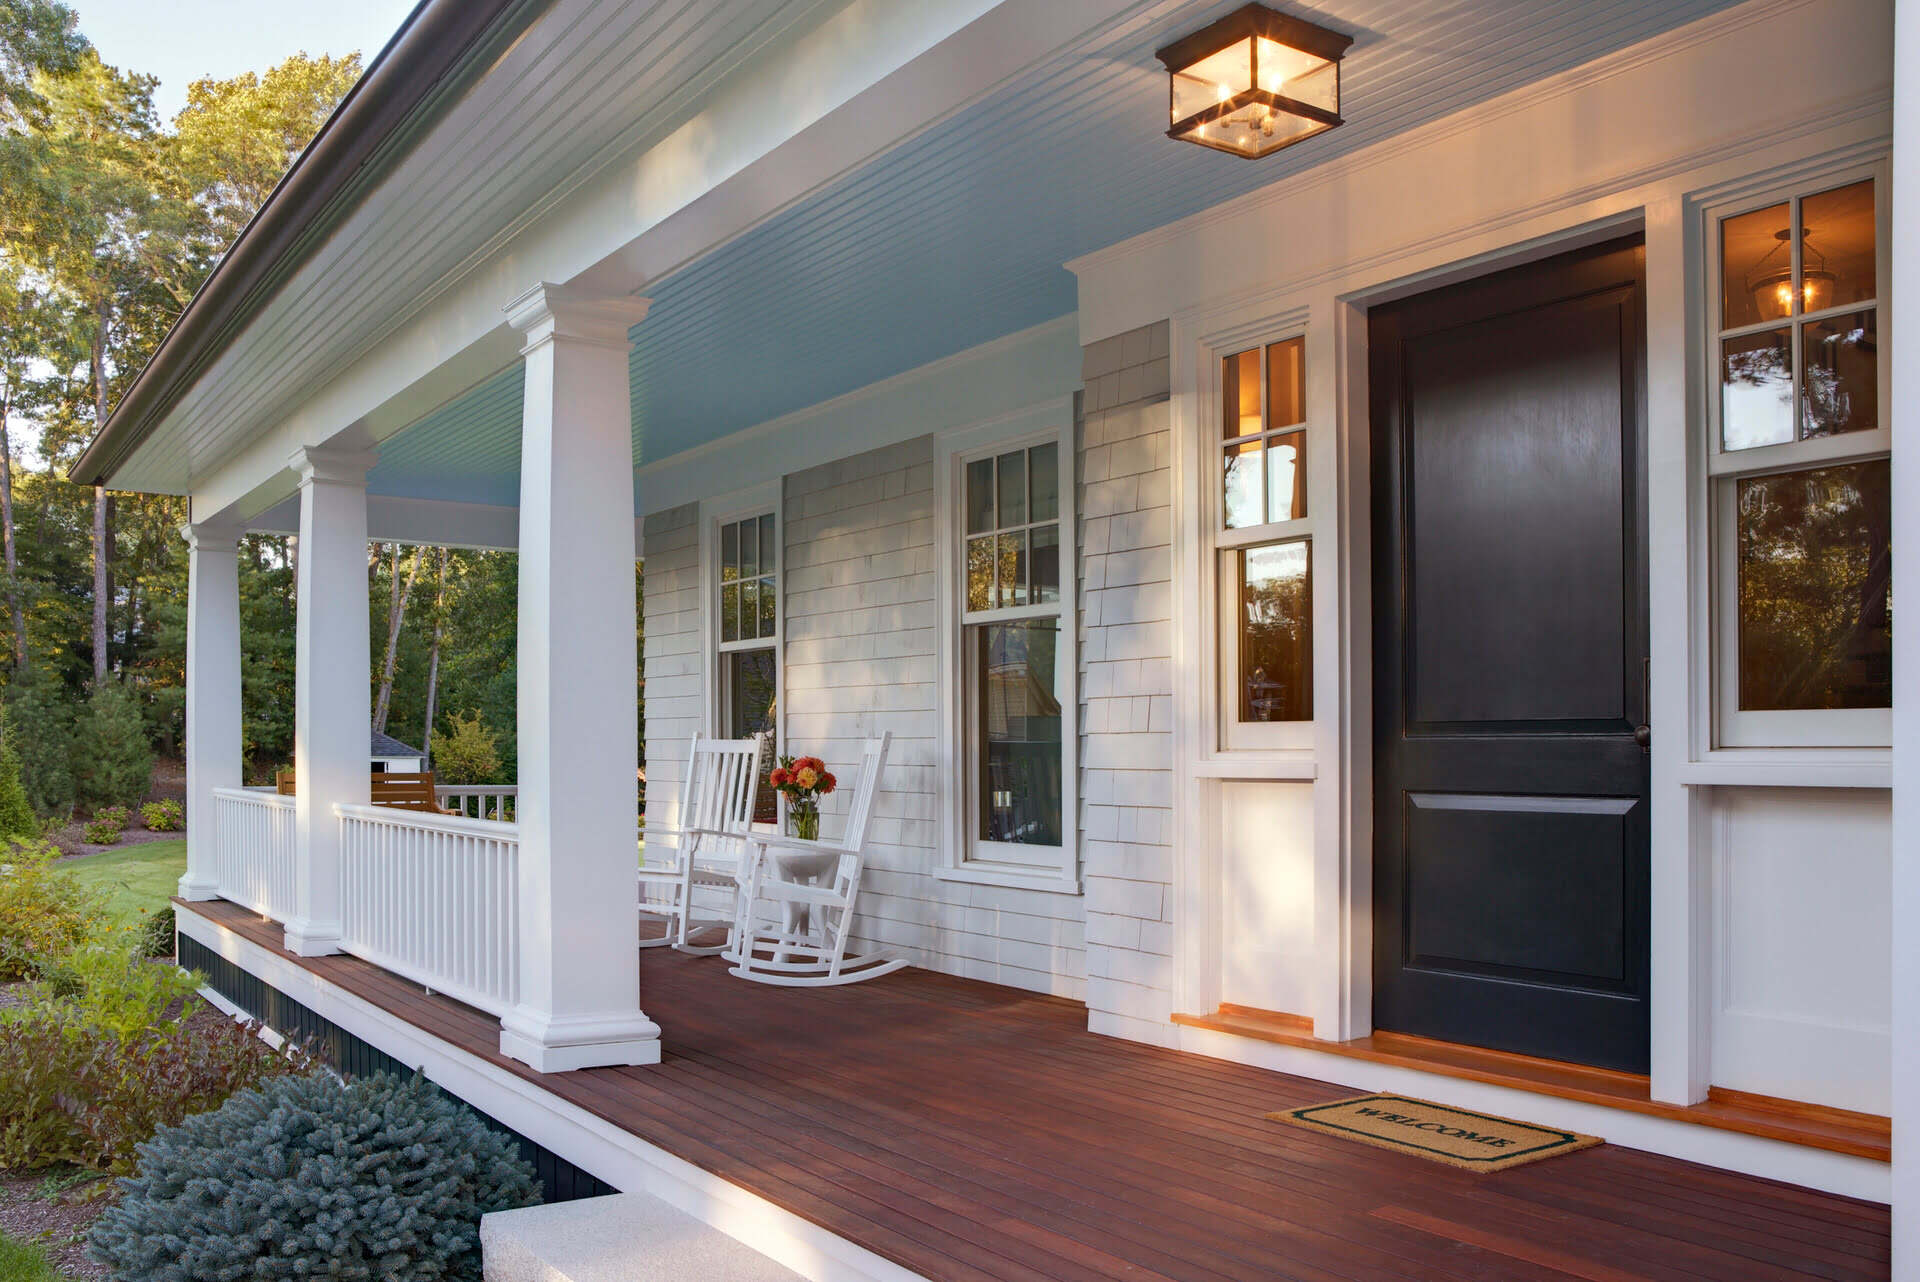 How To Paint Wood Porch